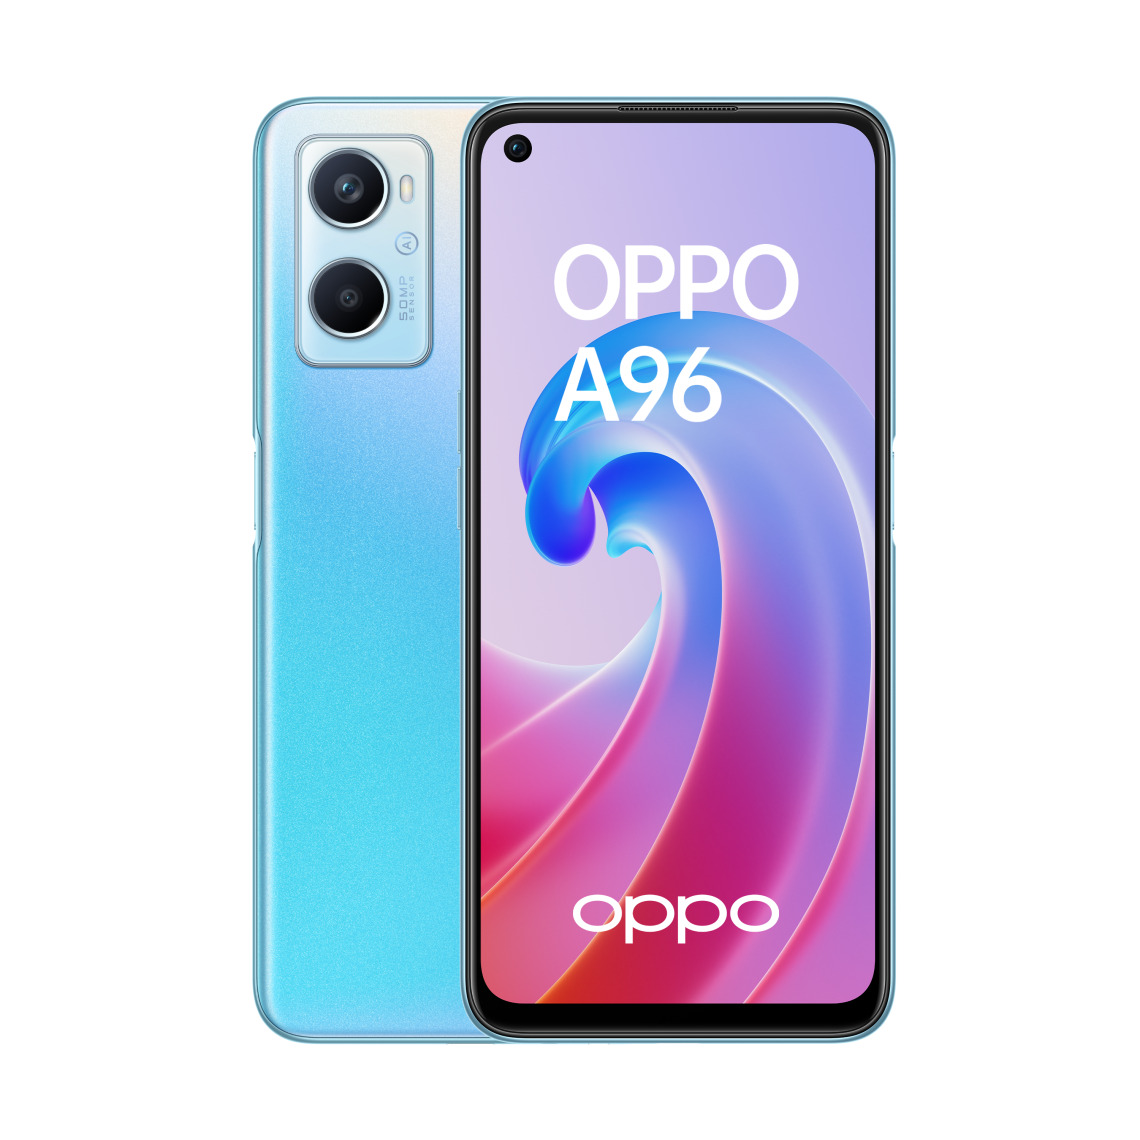 Oppo - A96 - 128Go - Bleu - Smartphone Android